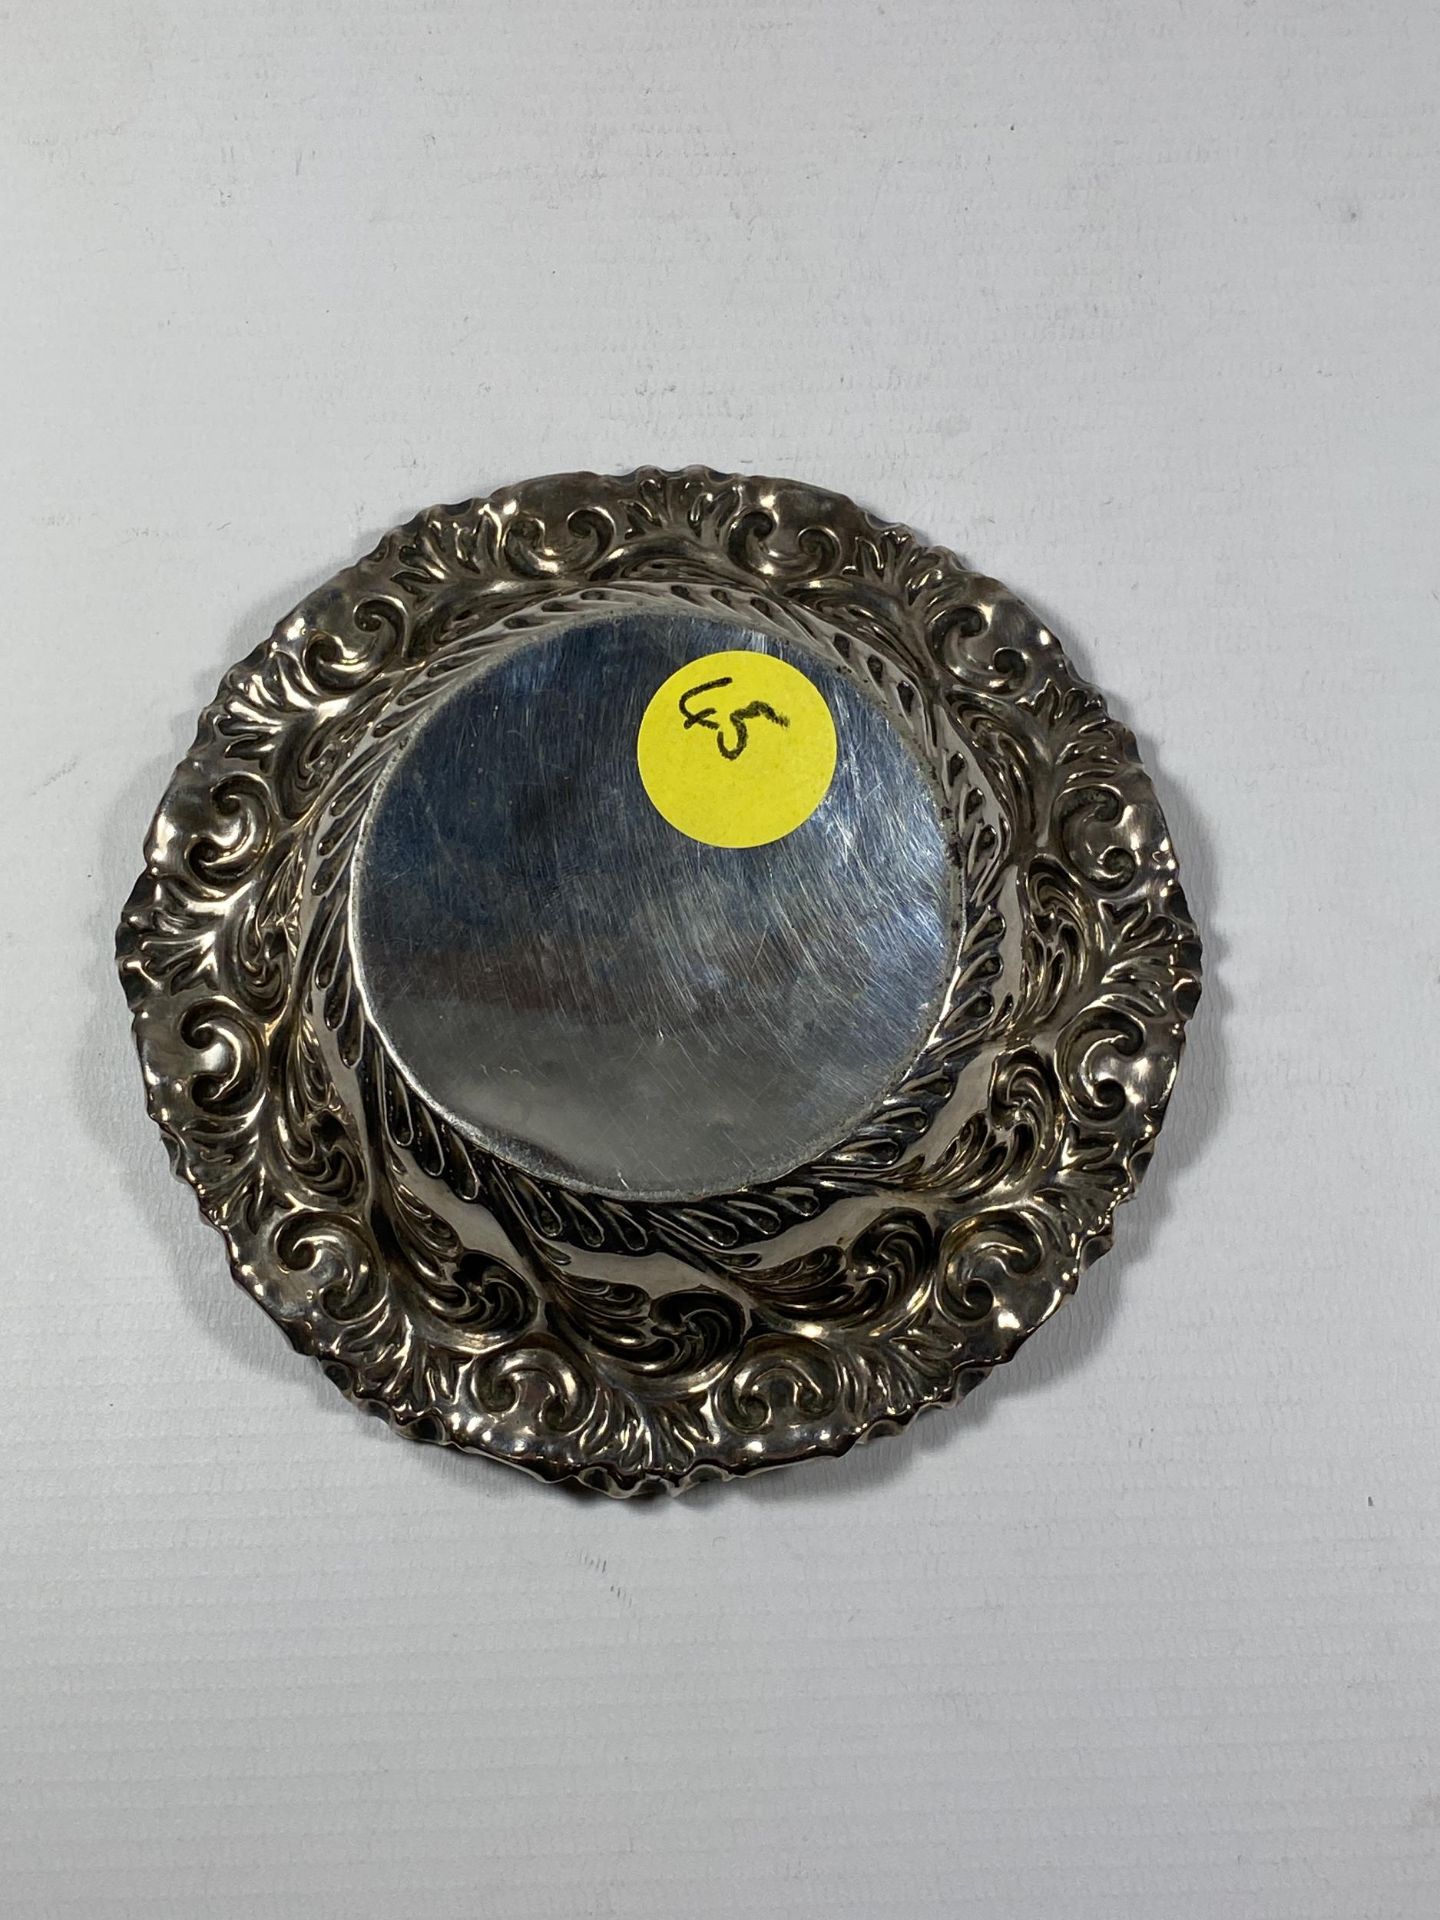 A VICTORIAN SILVER DISH, HALLMARKS FOR LONDON, 1899, MAKERS FENTON BROTHERS LTD, WEIGHT 85G - Image 3 of 3